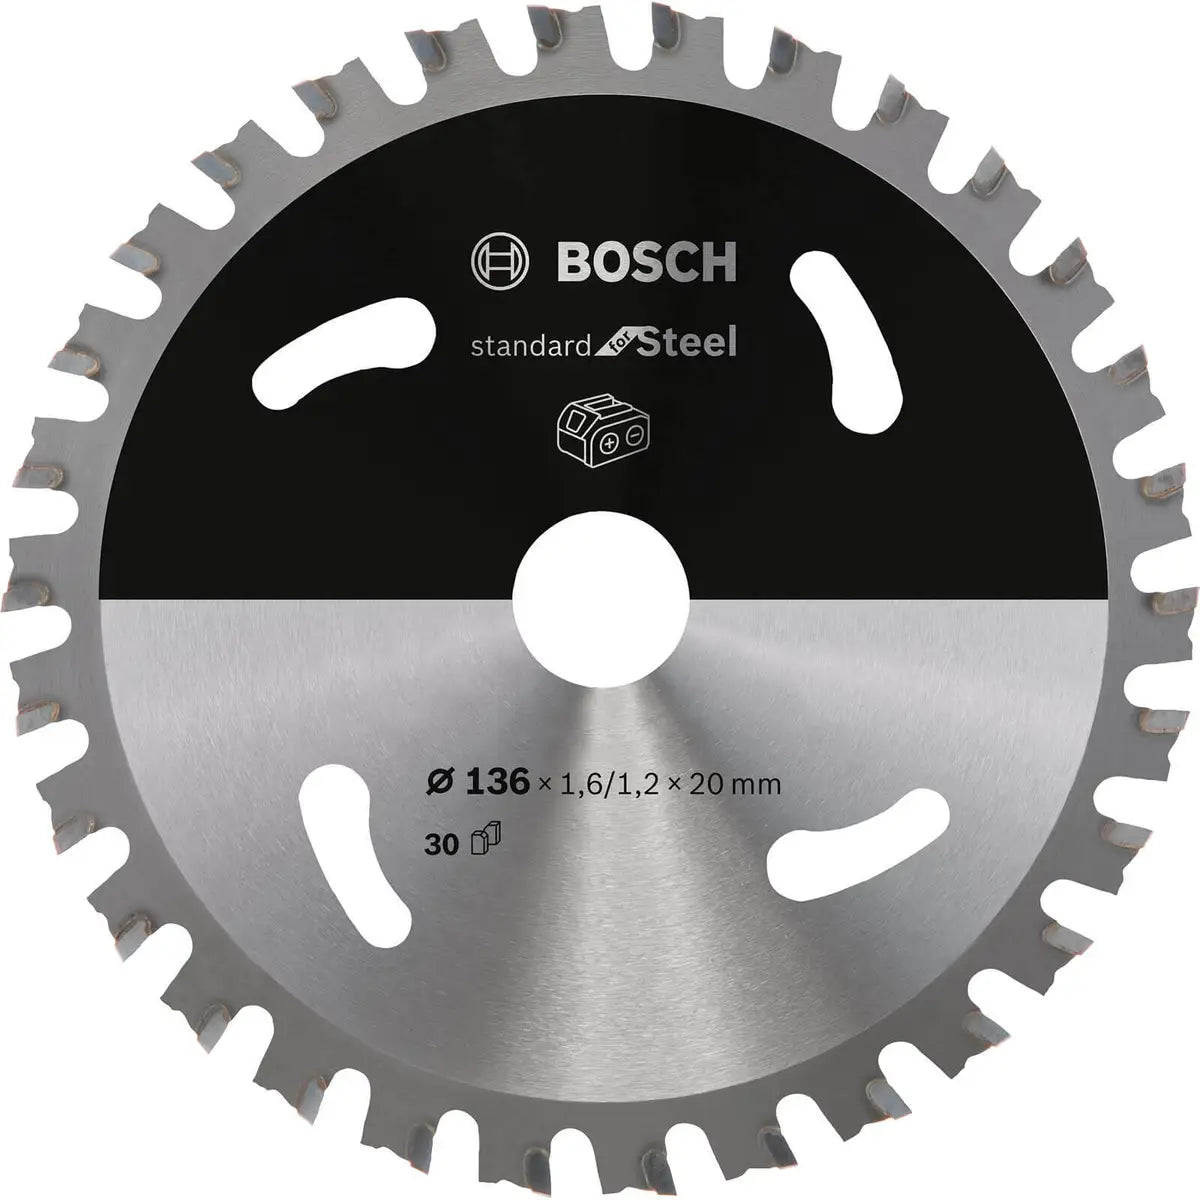 Bosch Standard Circular Saw Blade for Steel 136x1.6/1.2x20 T30 2608837746 Power Tool Services